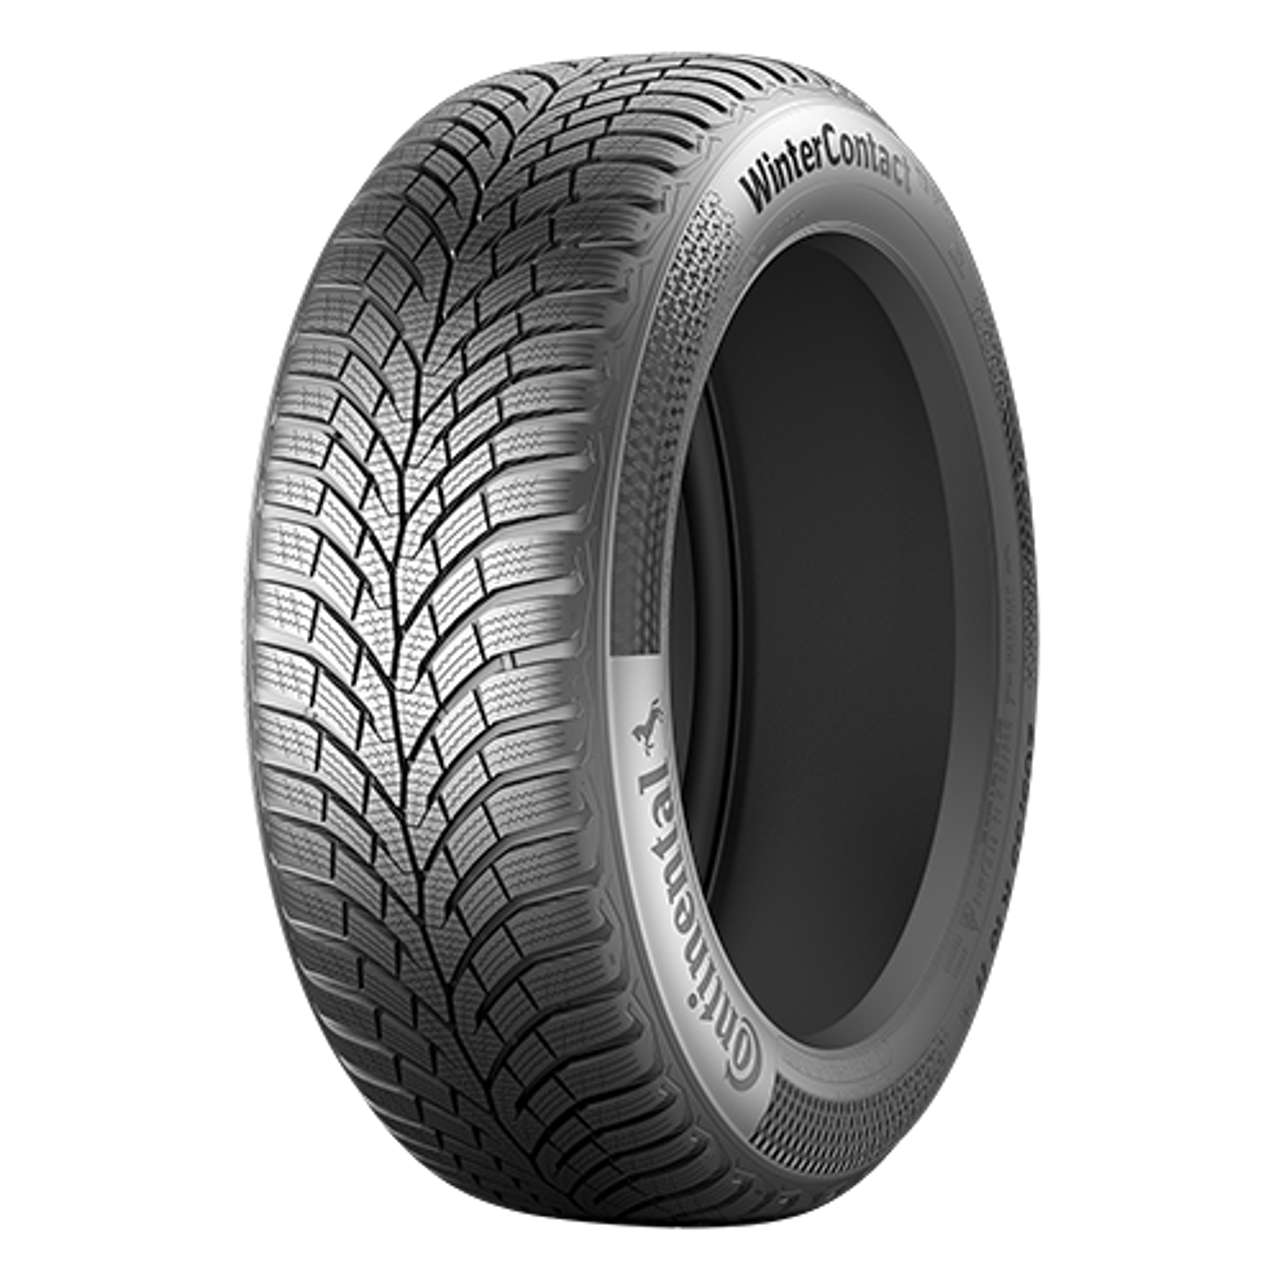 CONTINENTAL WINTERCONTACT TS 870 175/70R14 88T BSW